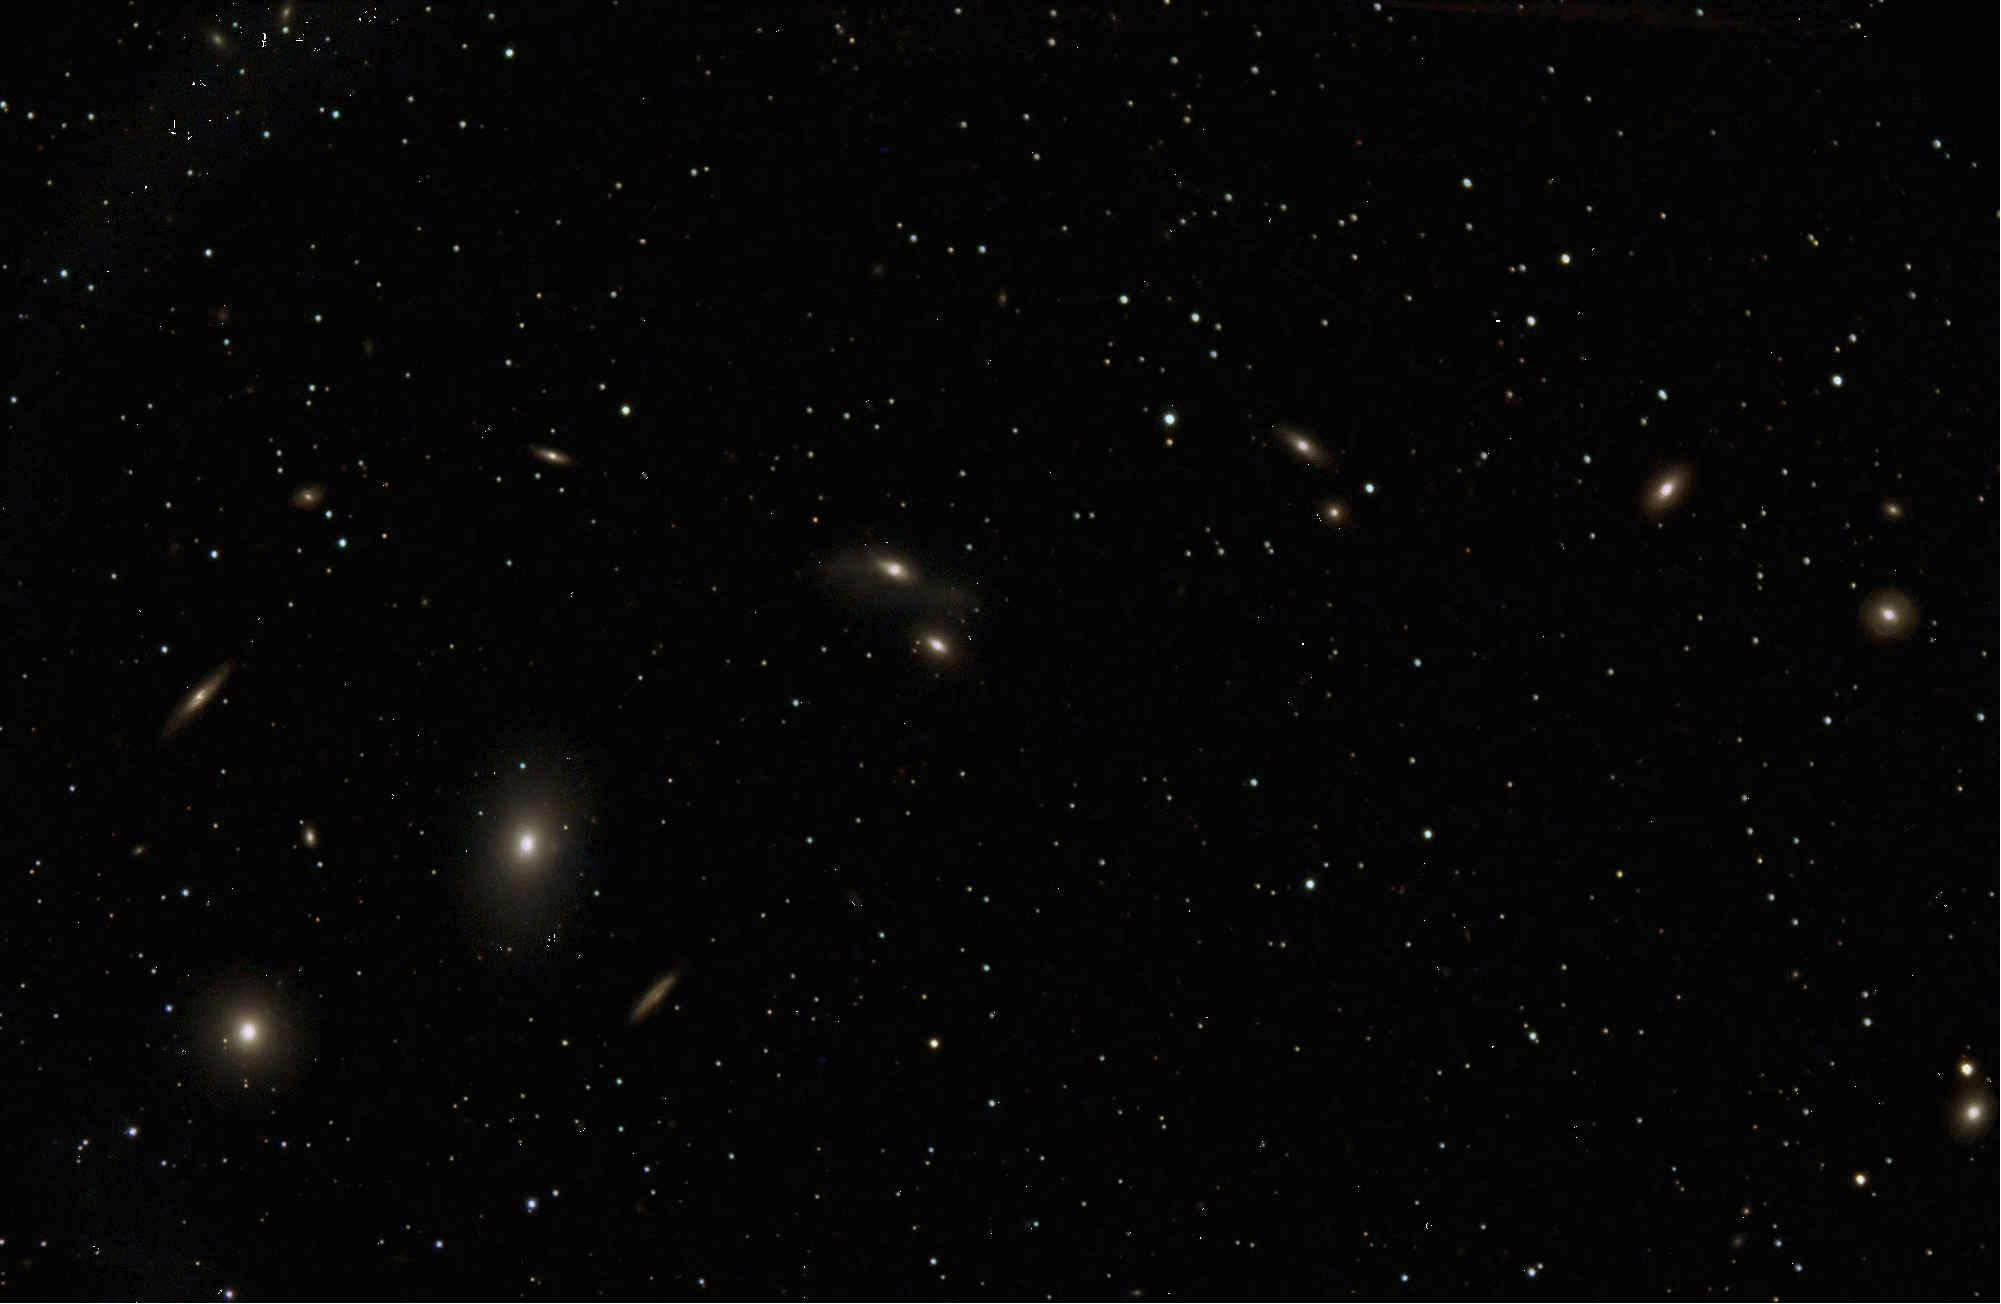 Markarian's Chain of Galaxies in Virgo, by Brian G.